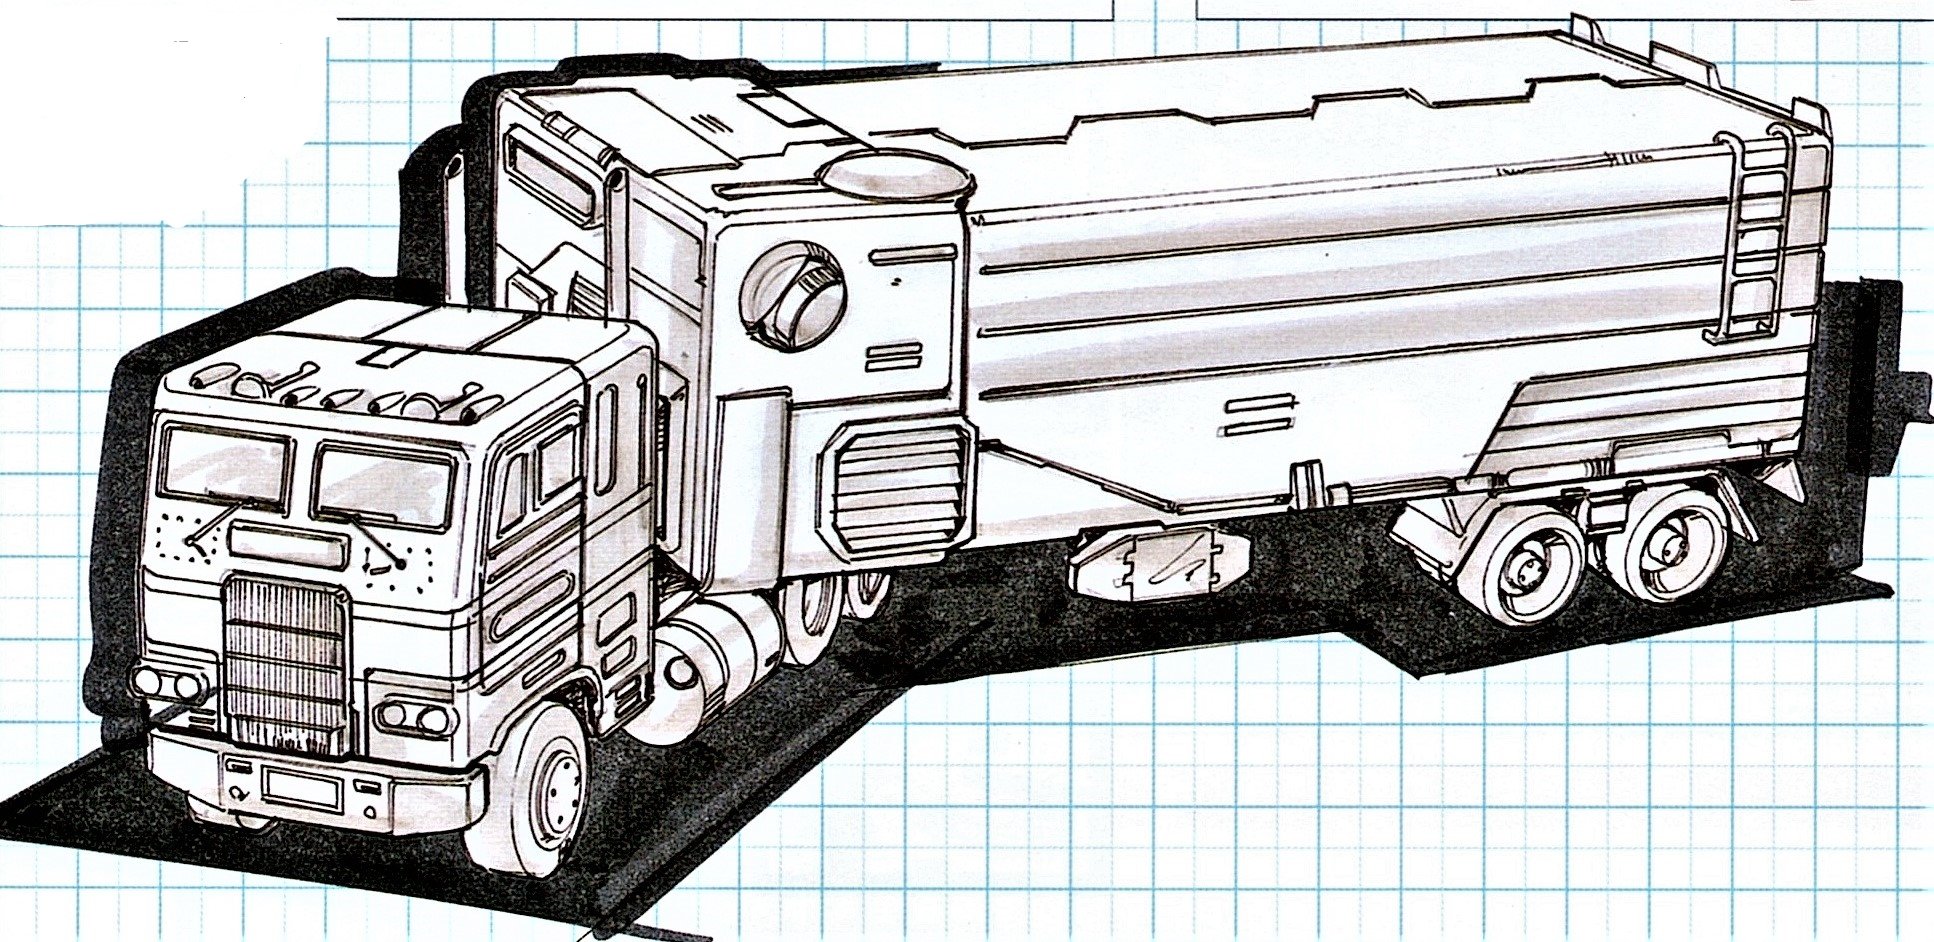 Tfraw transformers multimedia archive on x the original battle convoy g optimus prime went through many iterations in its design process this is a near final design for the vehicle mode and